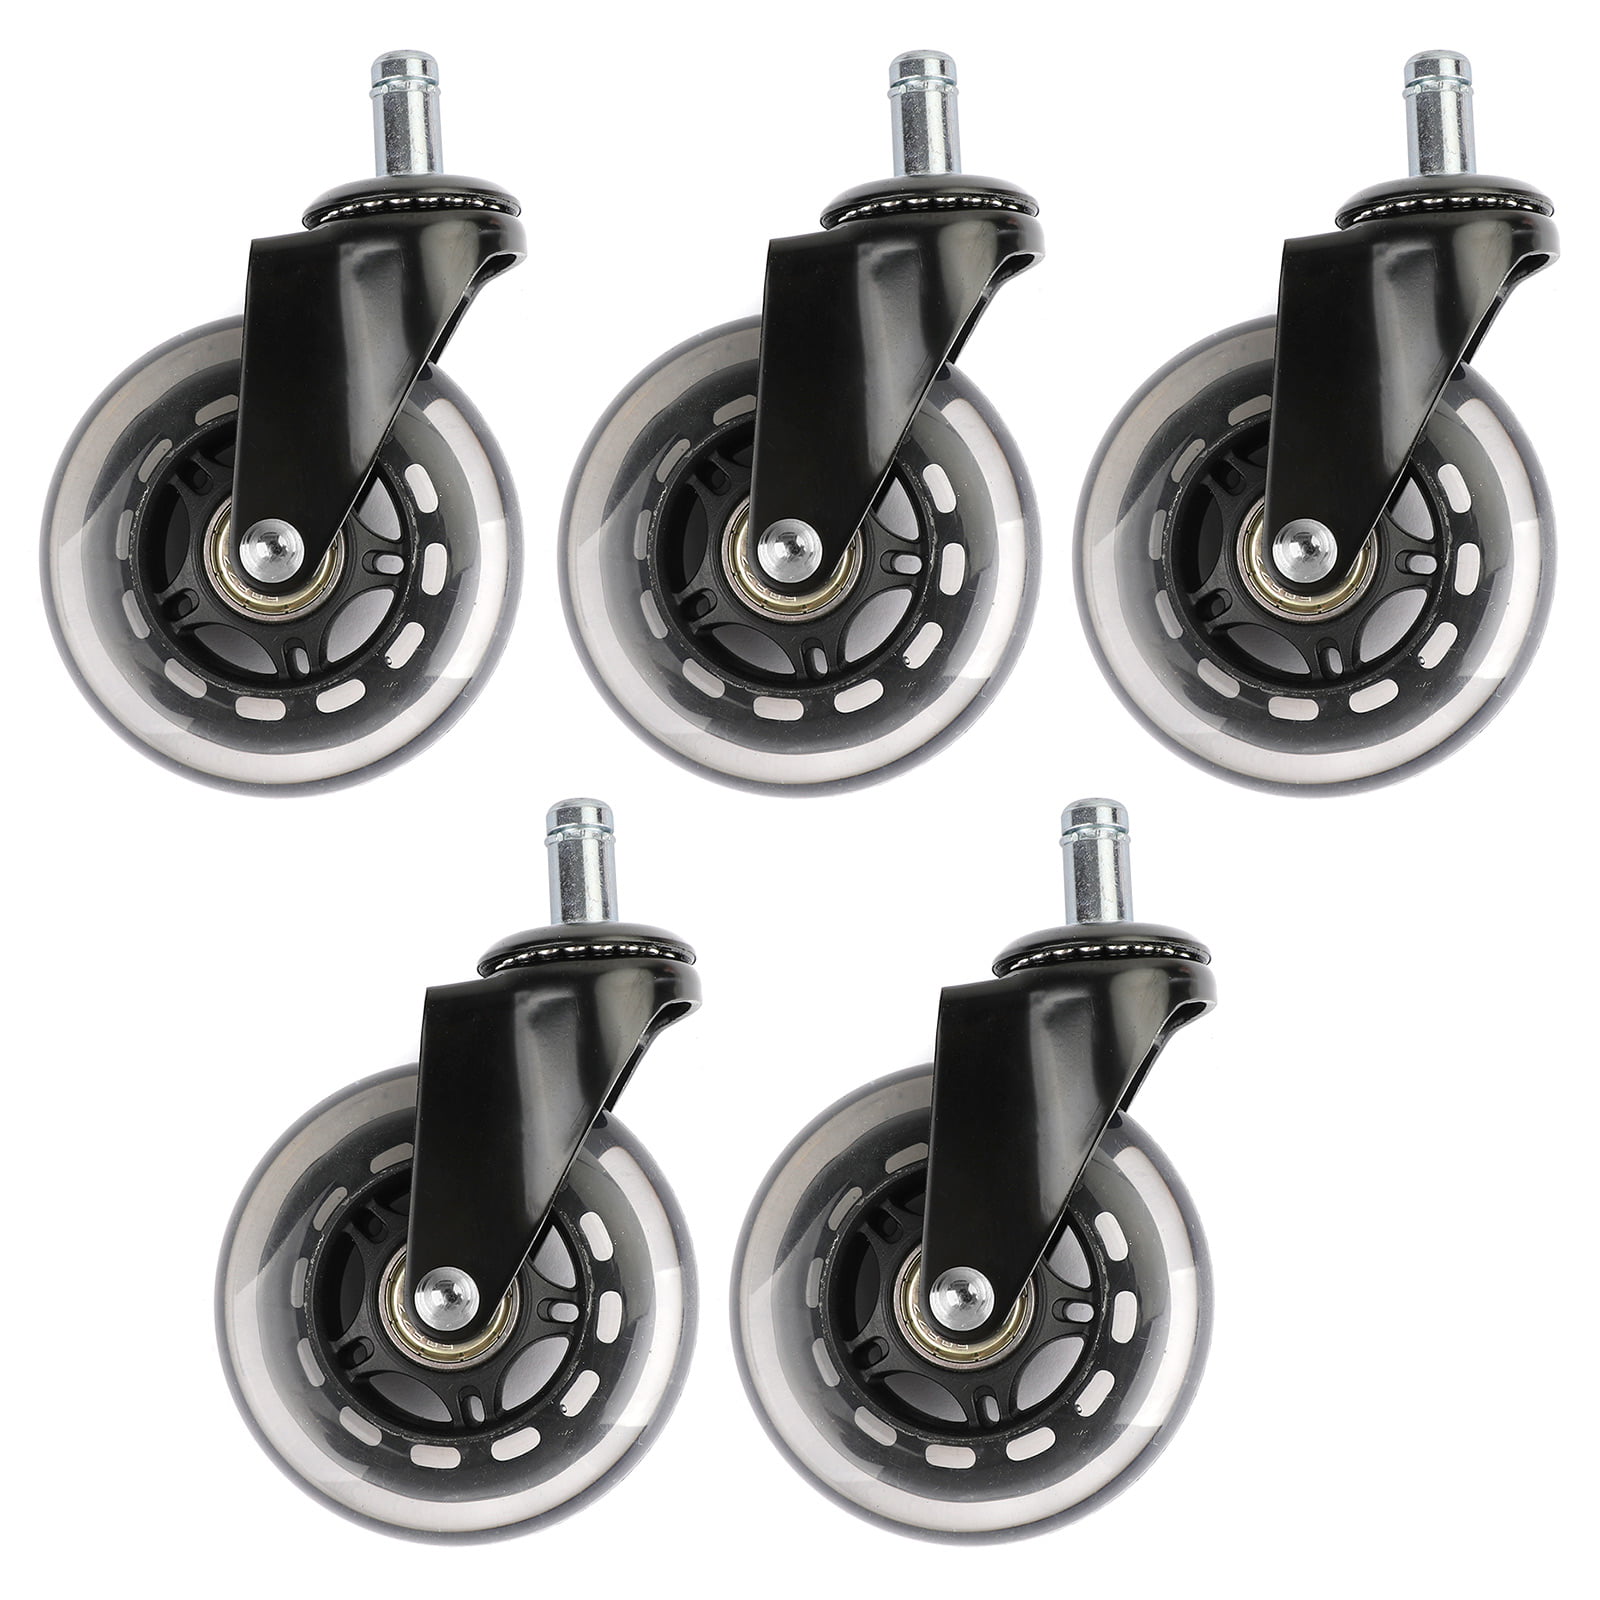 Set of 5 Office Chair Caster Swivel Wheels Replacement Floors Heavy Duty 3 inch 